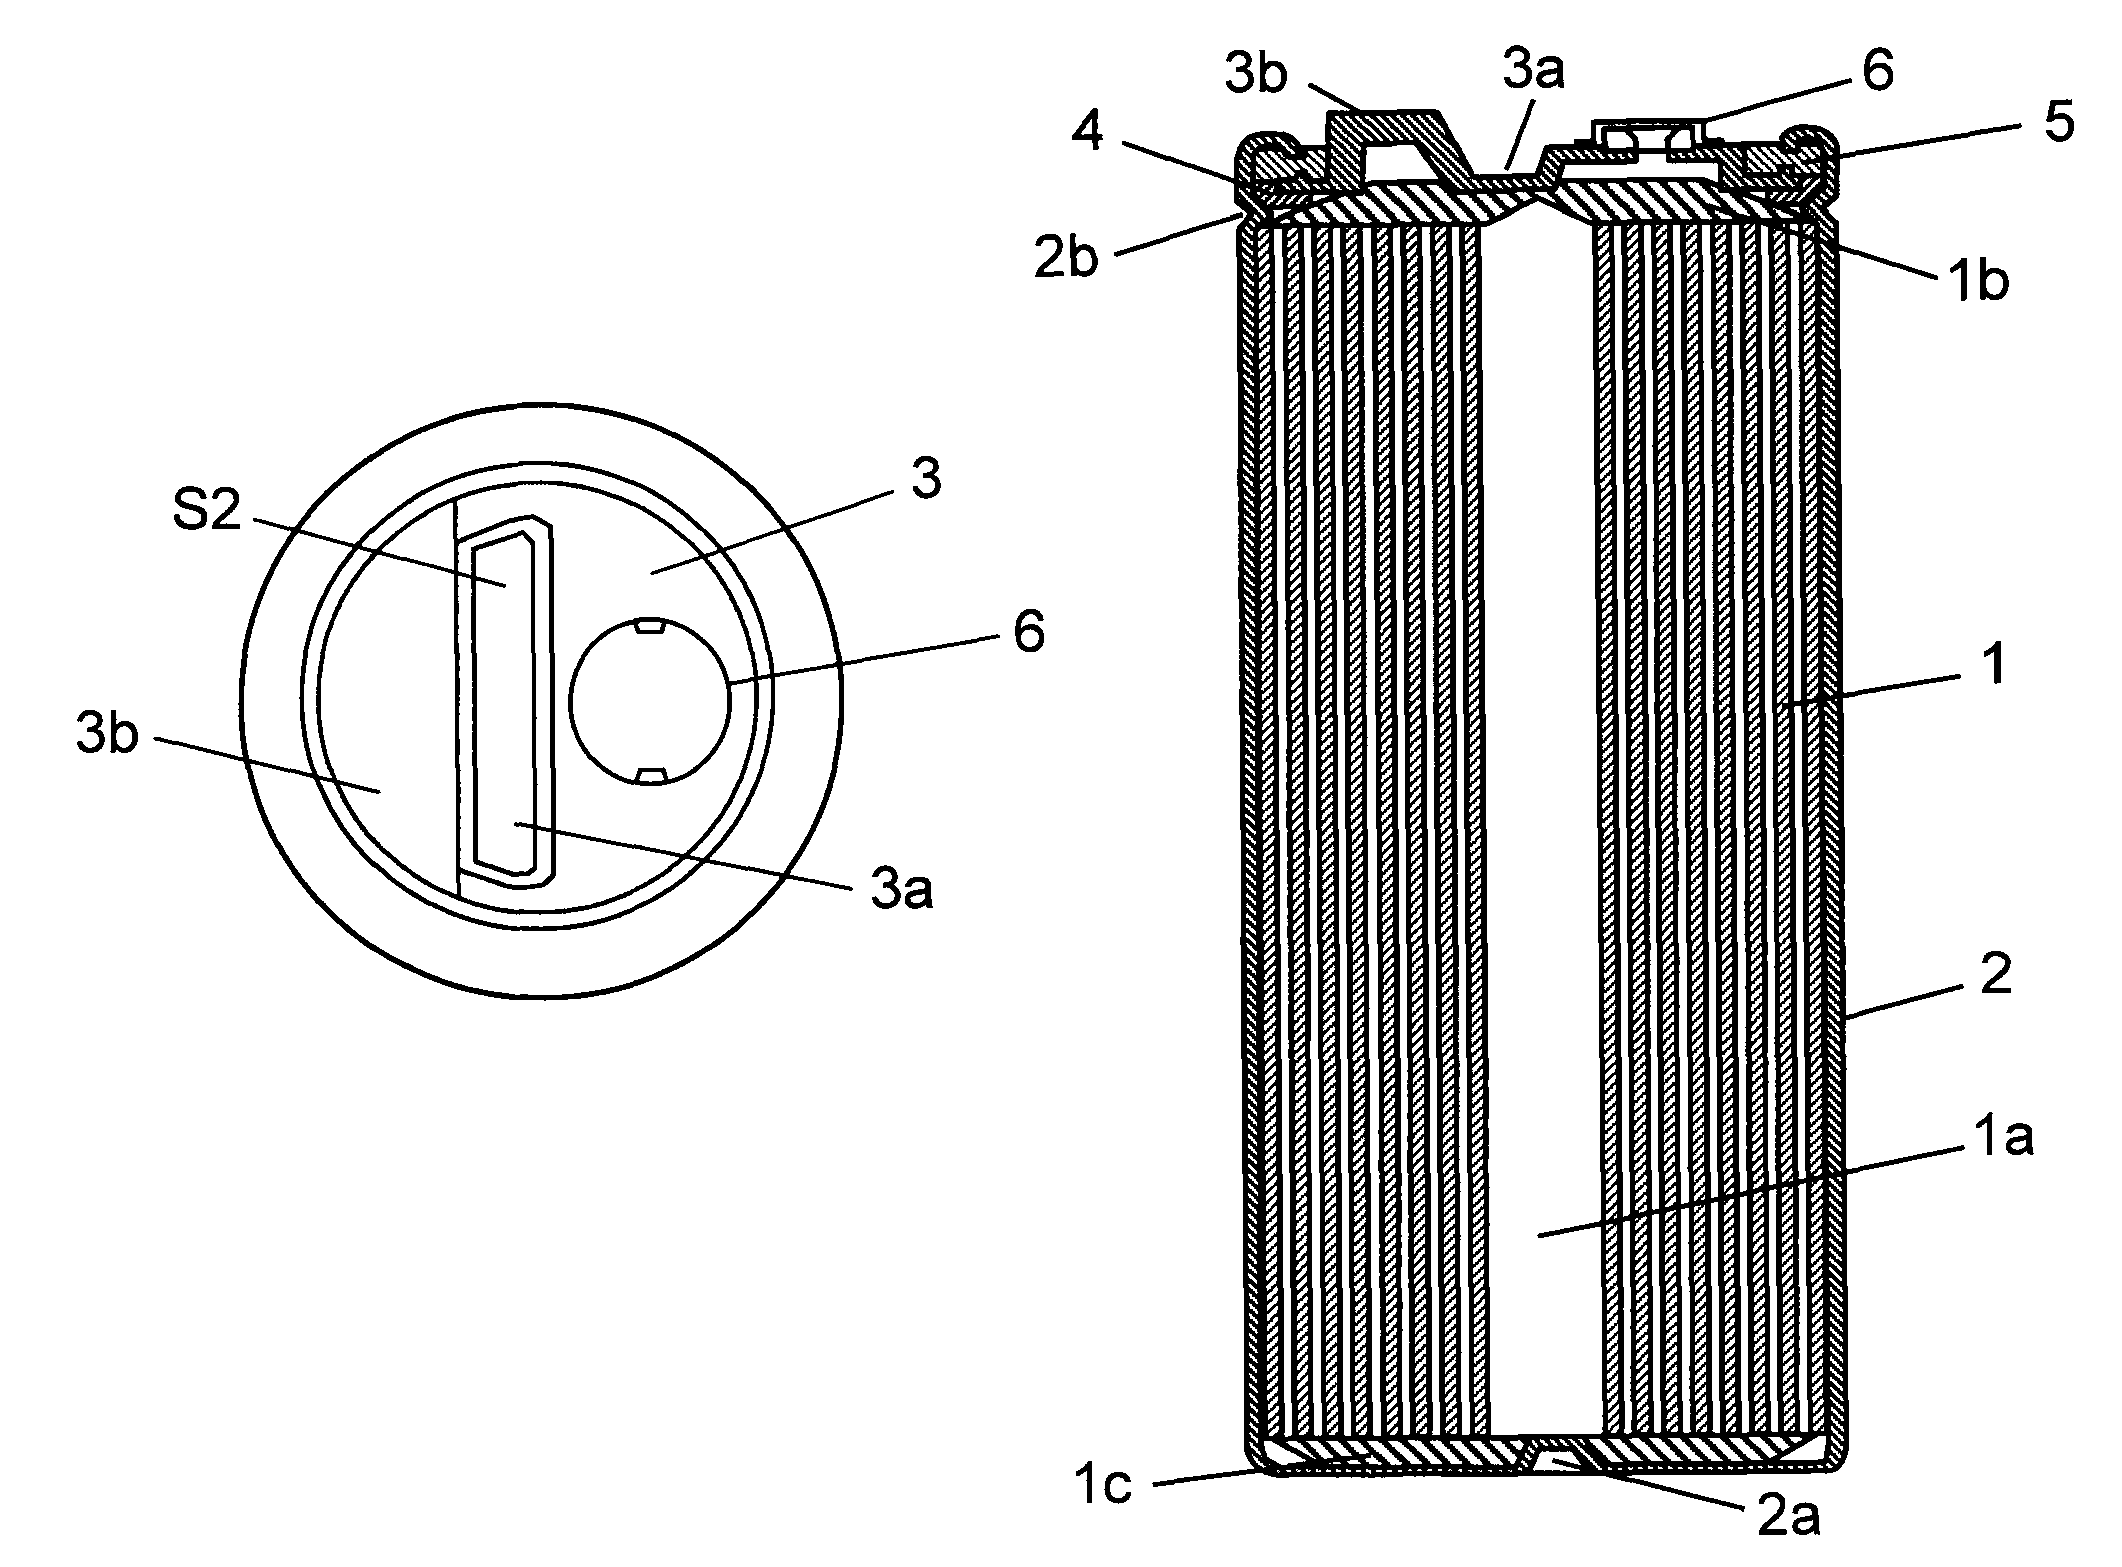 Capacitor with defined terminal plate and housing joint areas